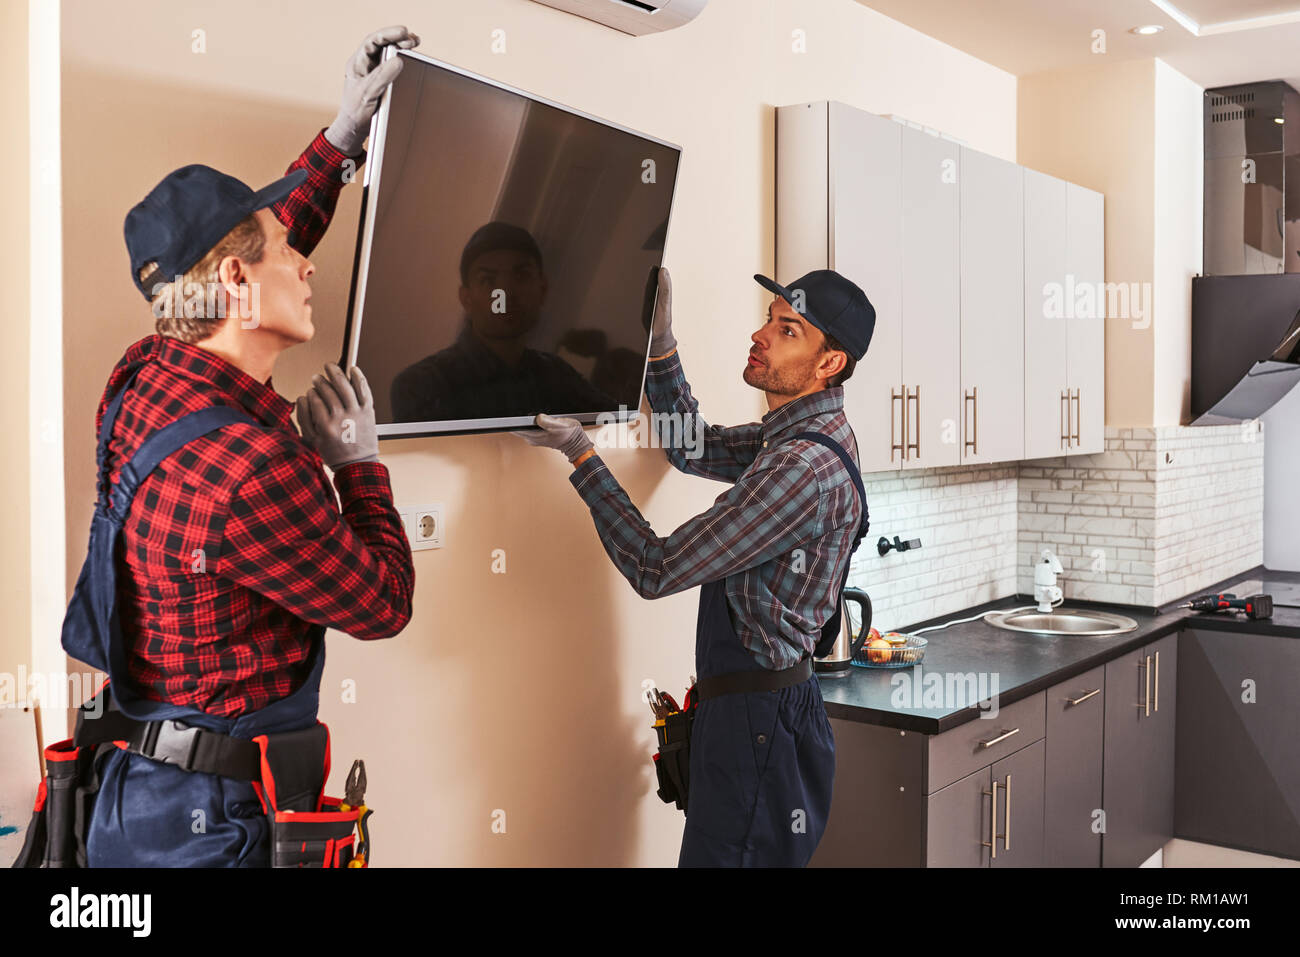 Dismantling of electronics equipment. Two technician remove plasma television in kitchen of customer. Senior mechanic with young trainee Stock Photo